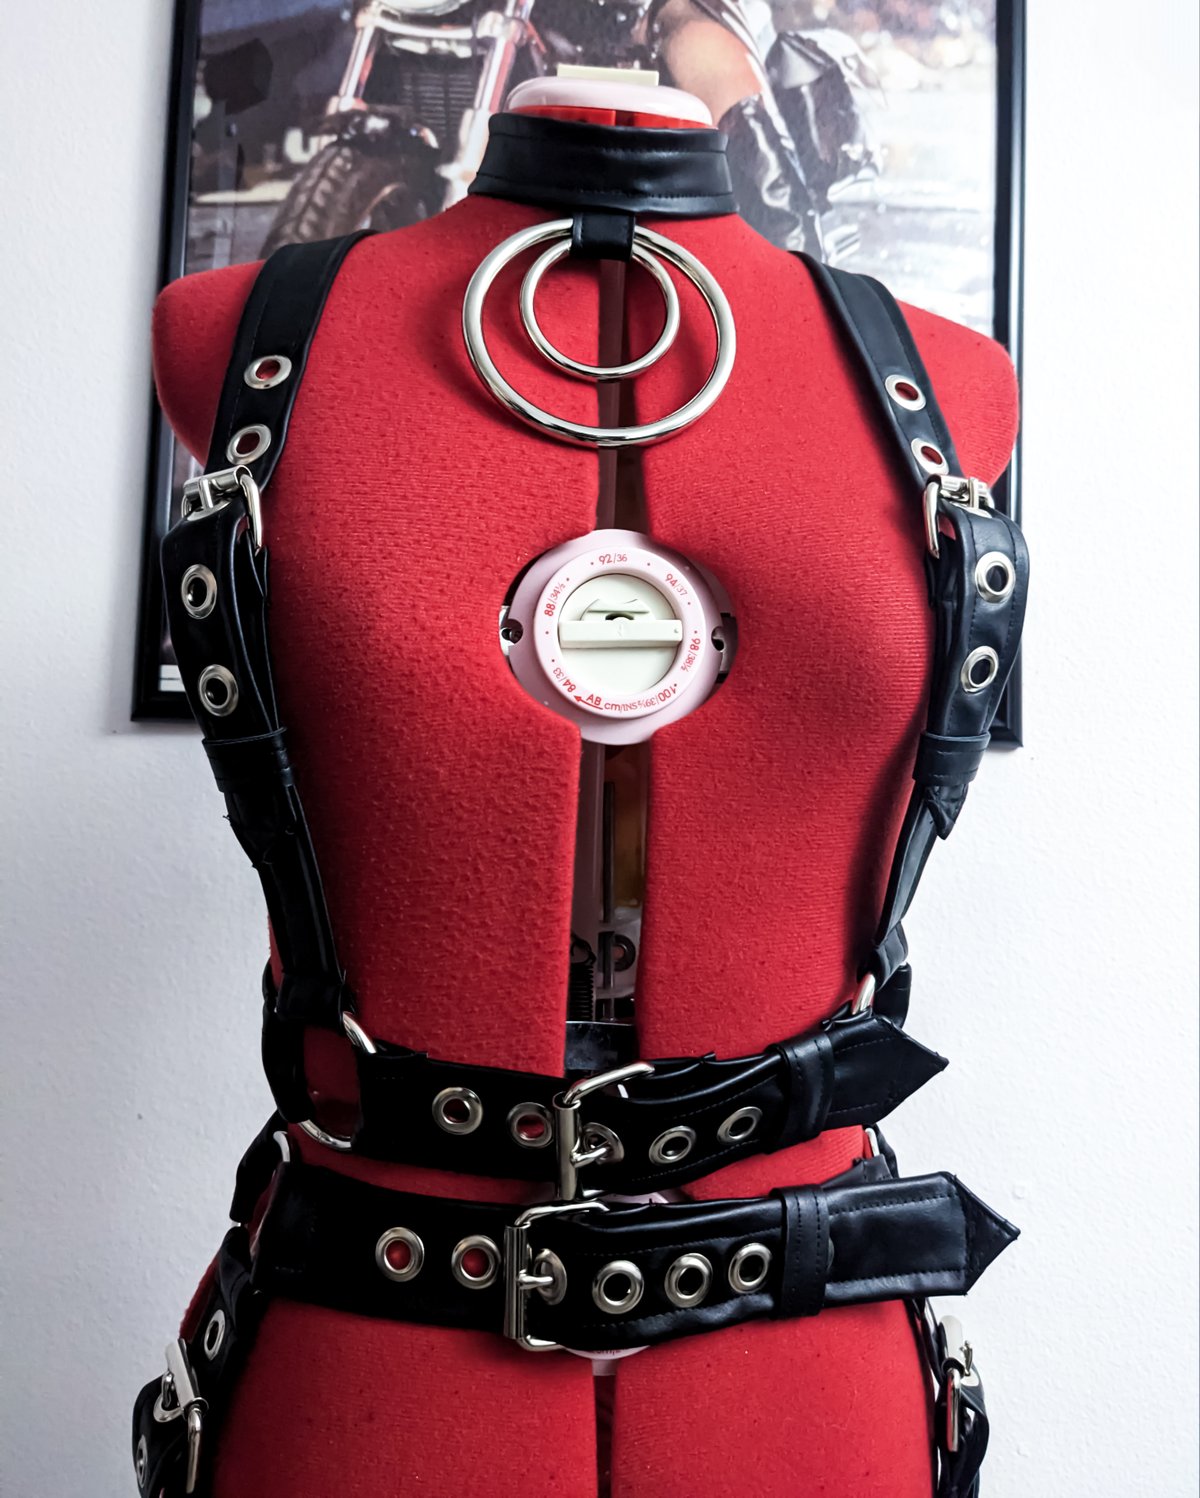 MADE-TO-ORDER: The Suspender Harness